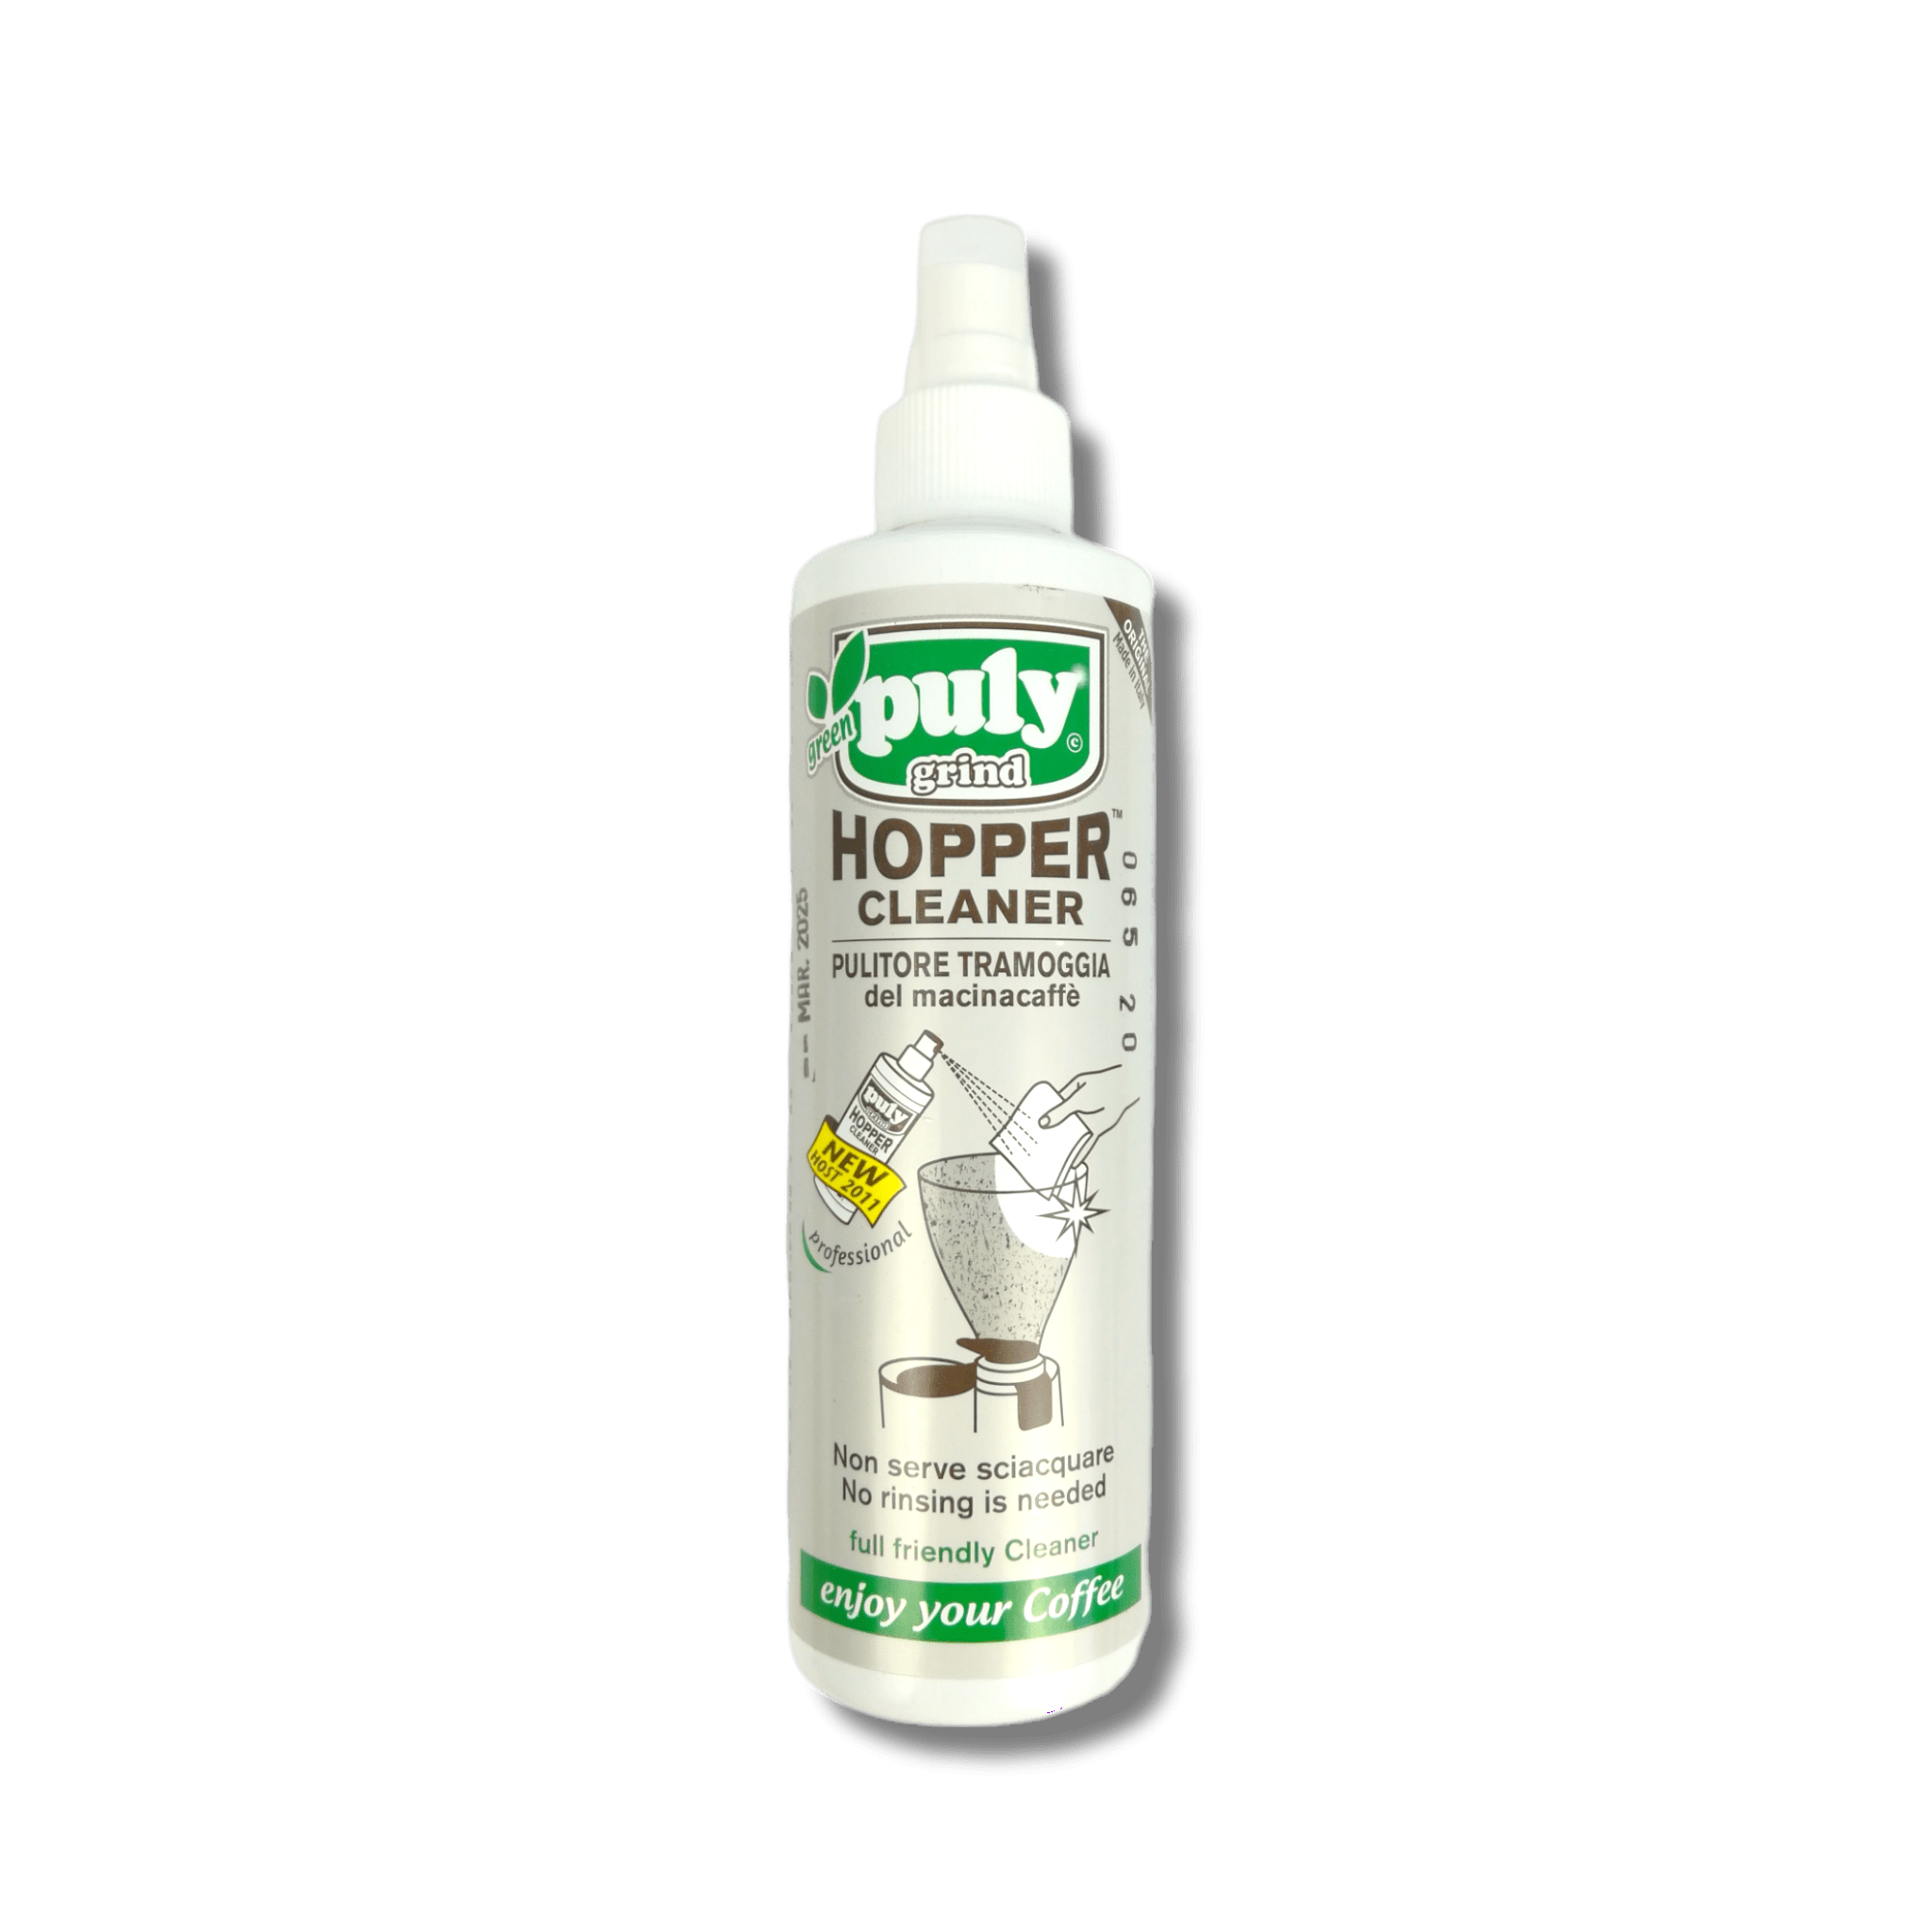 PULY GREEN GRIND HOPPER CLEANER